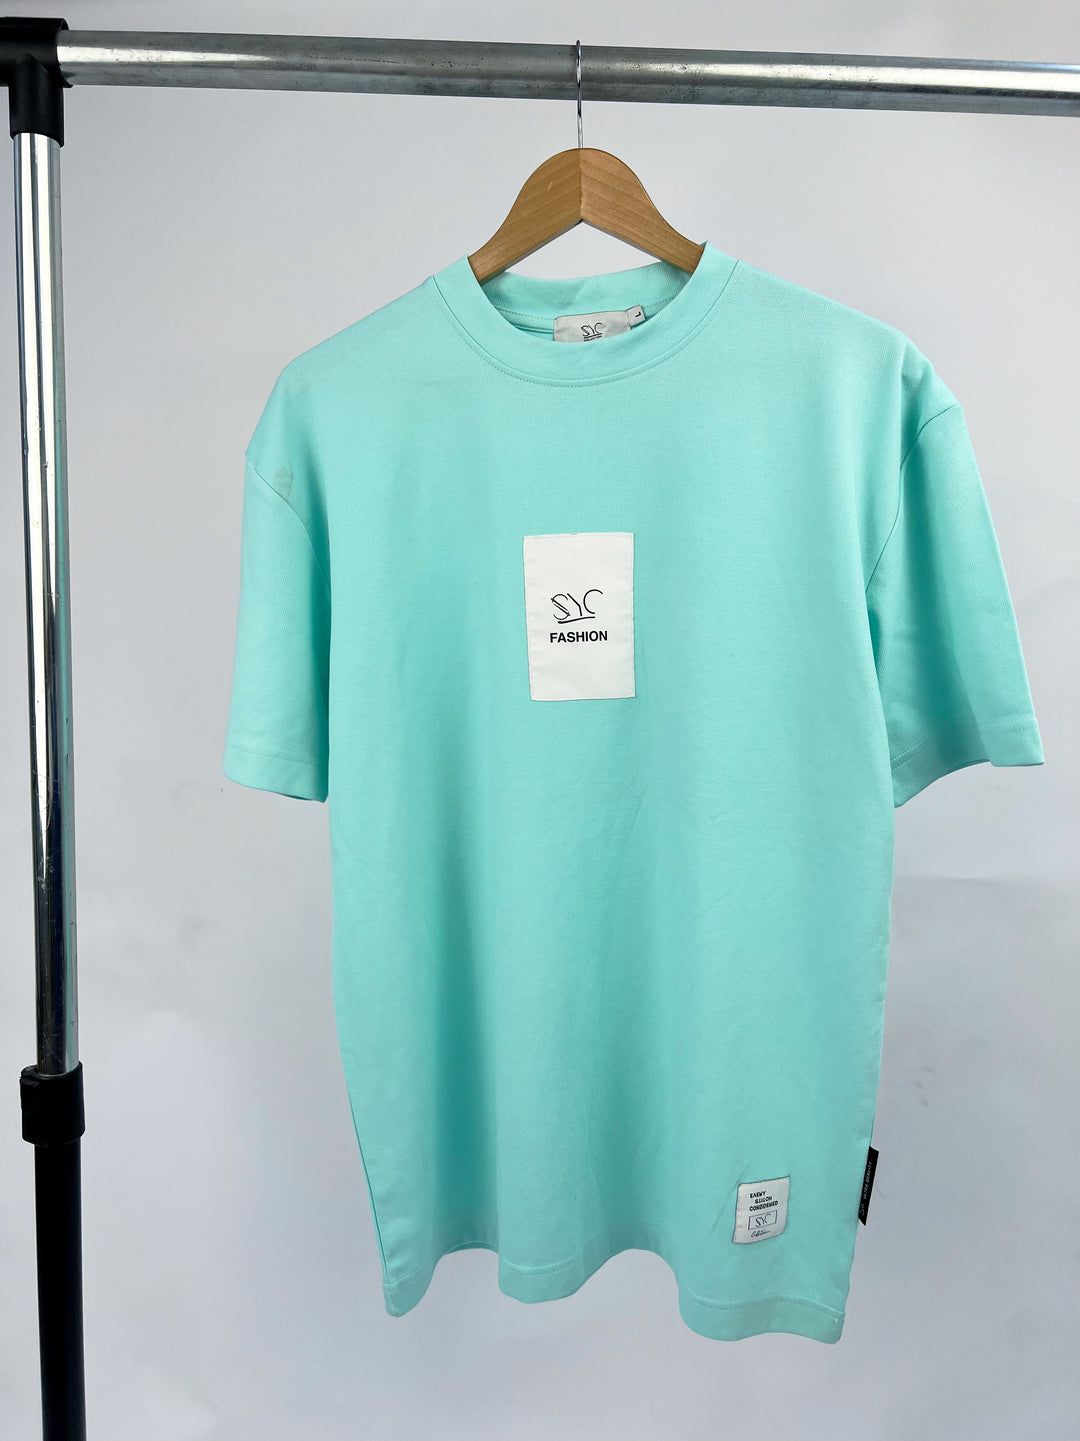 SYC collection fashion block t-shirt in teal blue